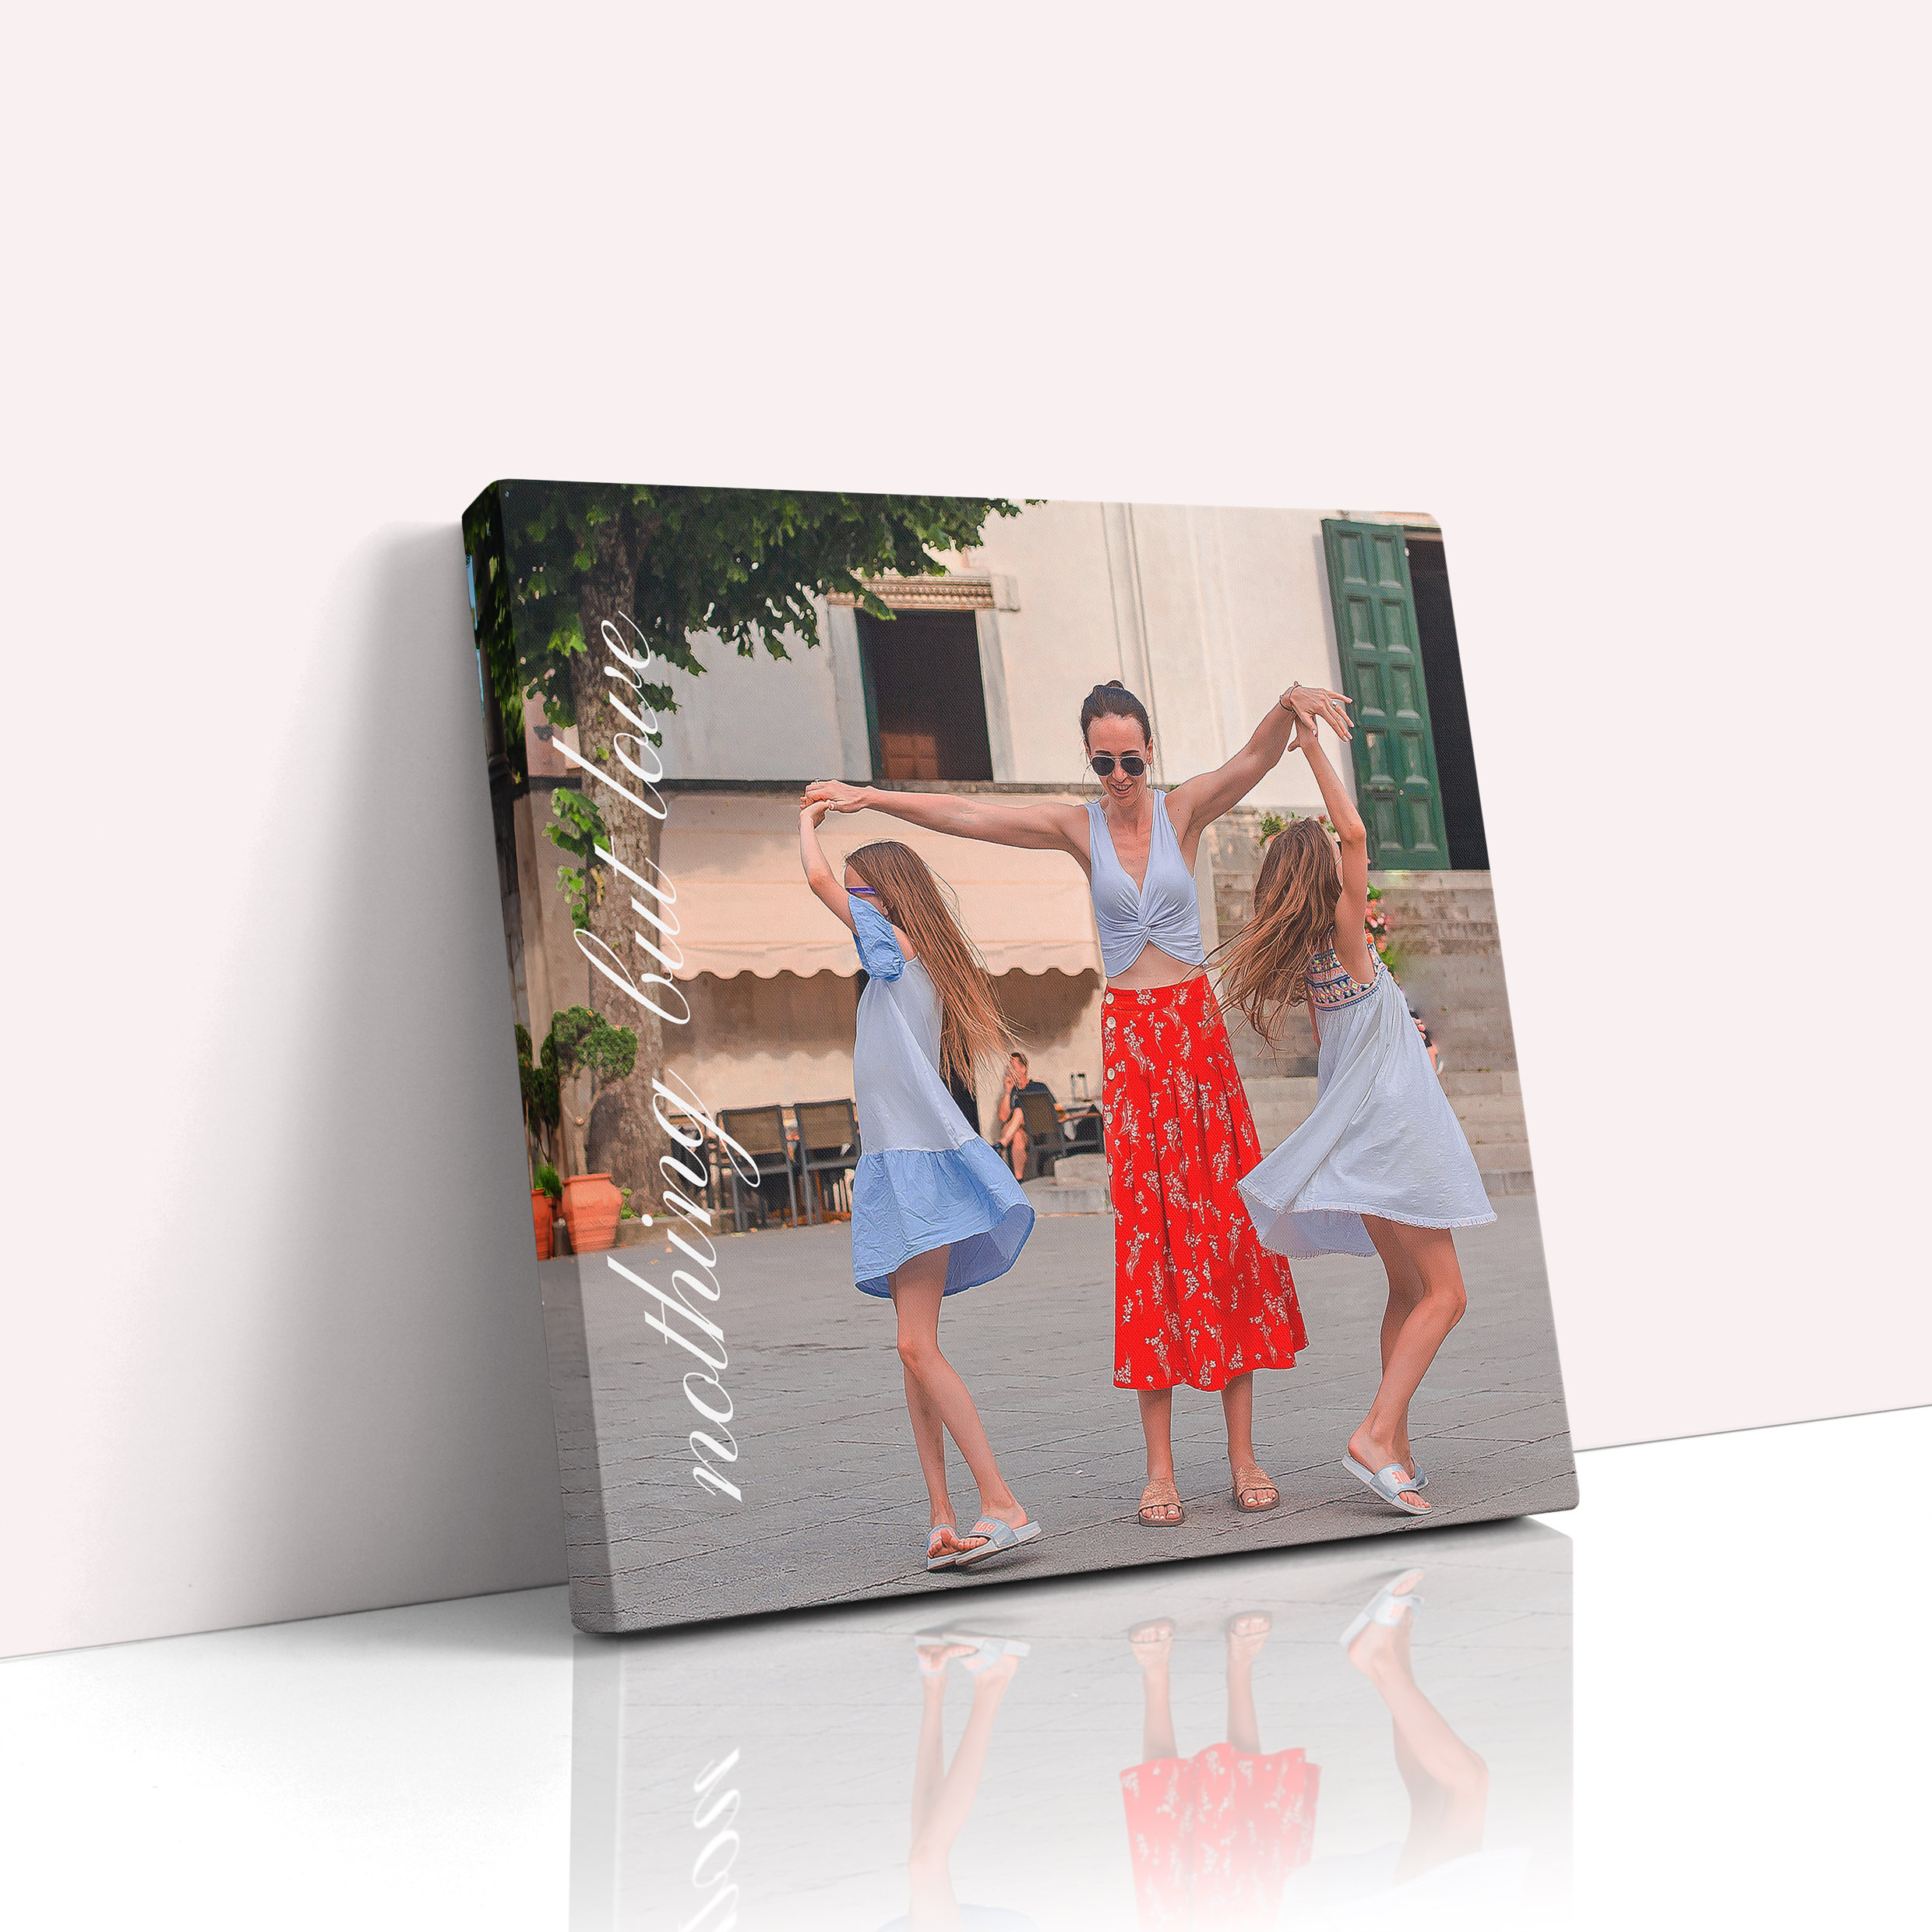  Personalised Timeless Moments Stretch Canvas Print - Crafted from durable acrylic-coated polyester, this portrait-oriented canvas preserves cherished memories for lasting beauty.